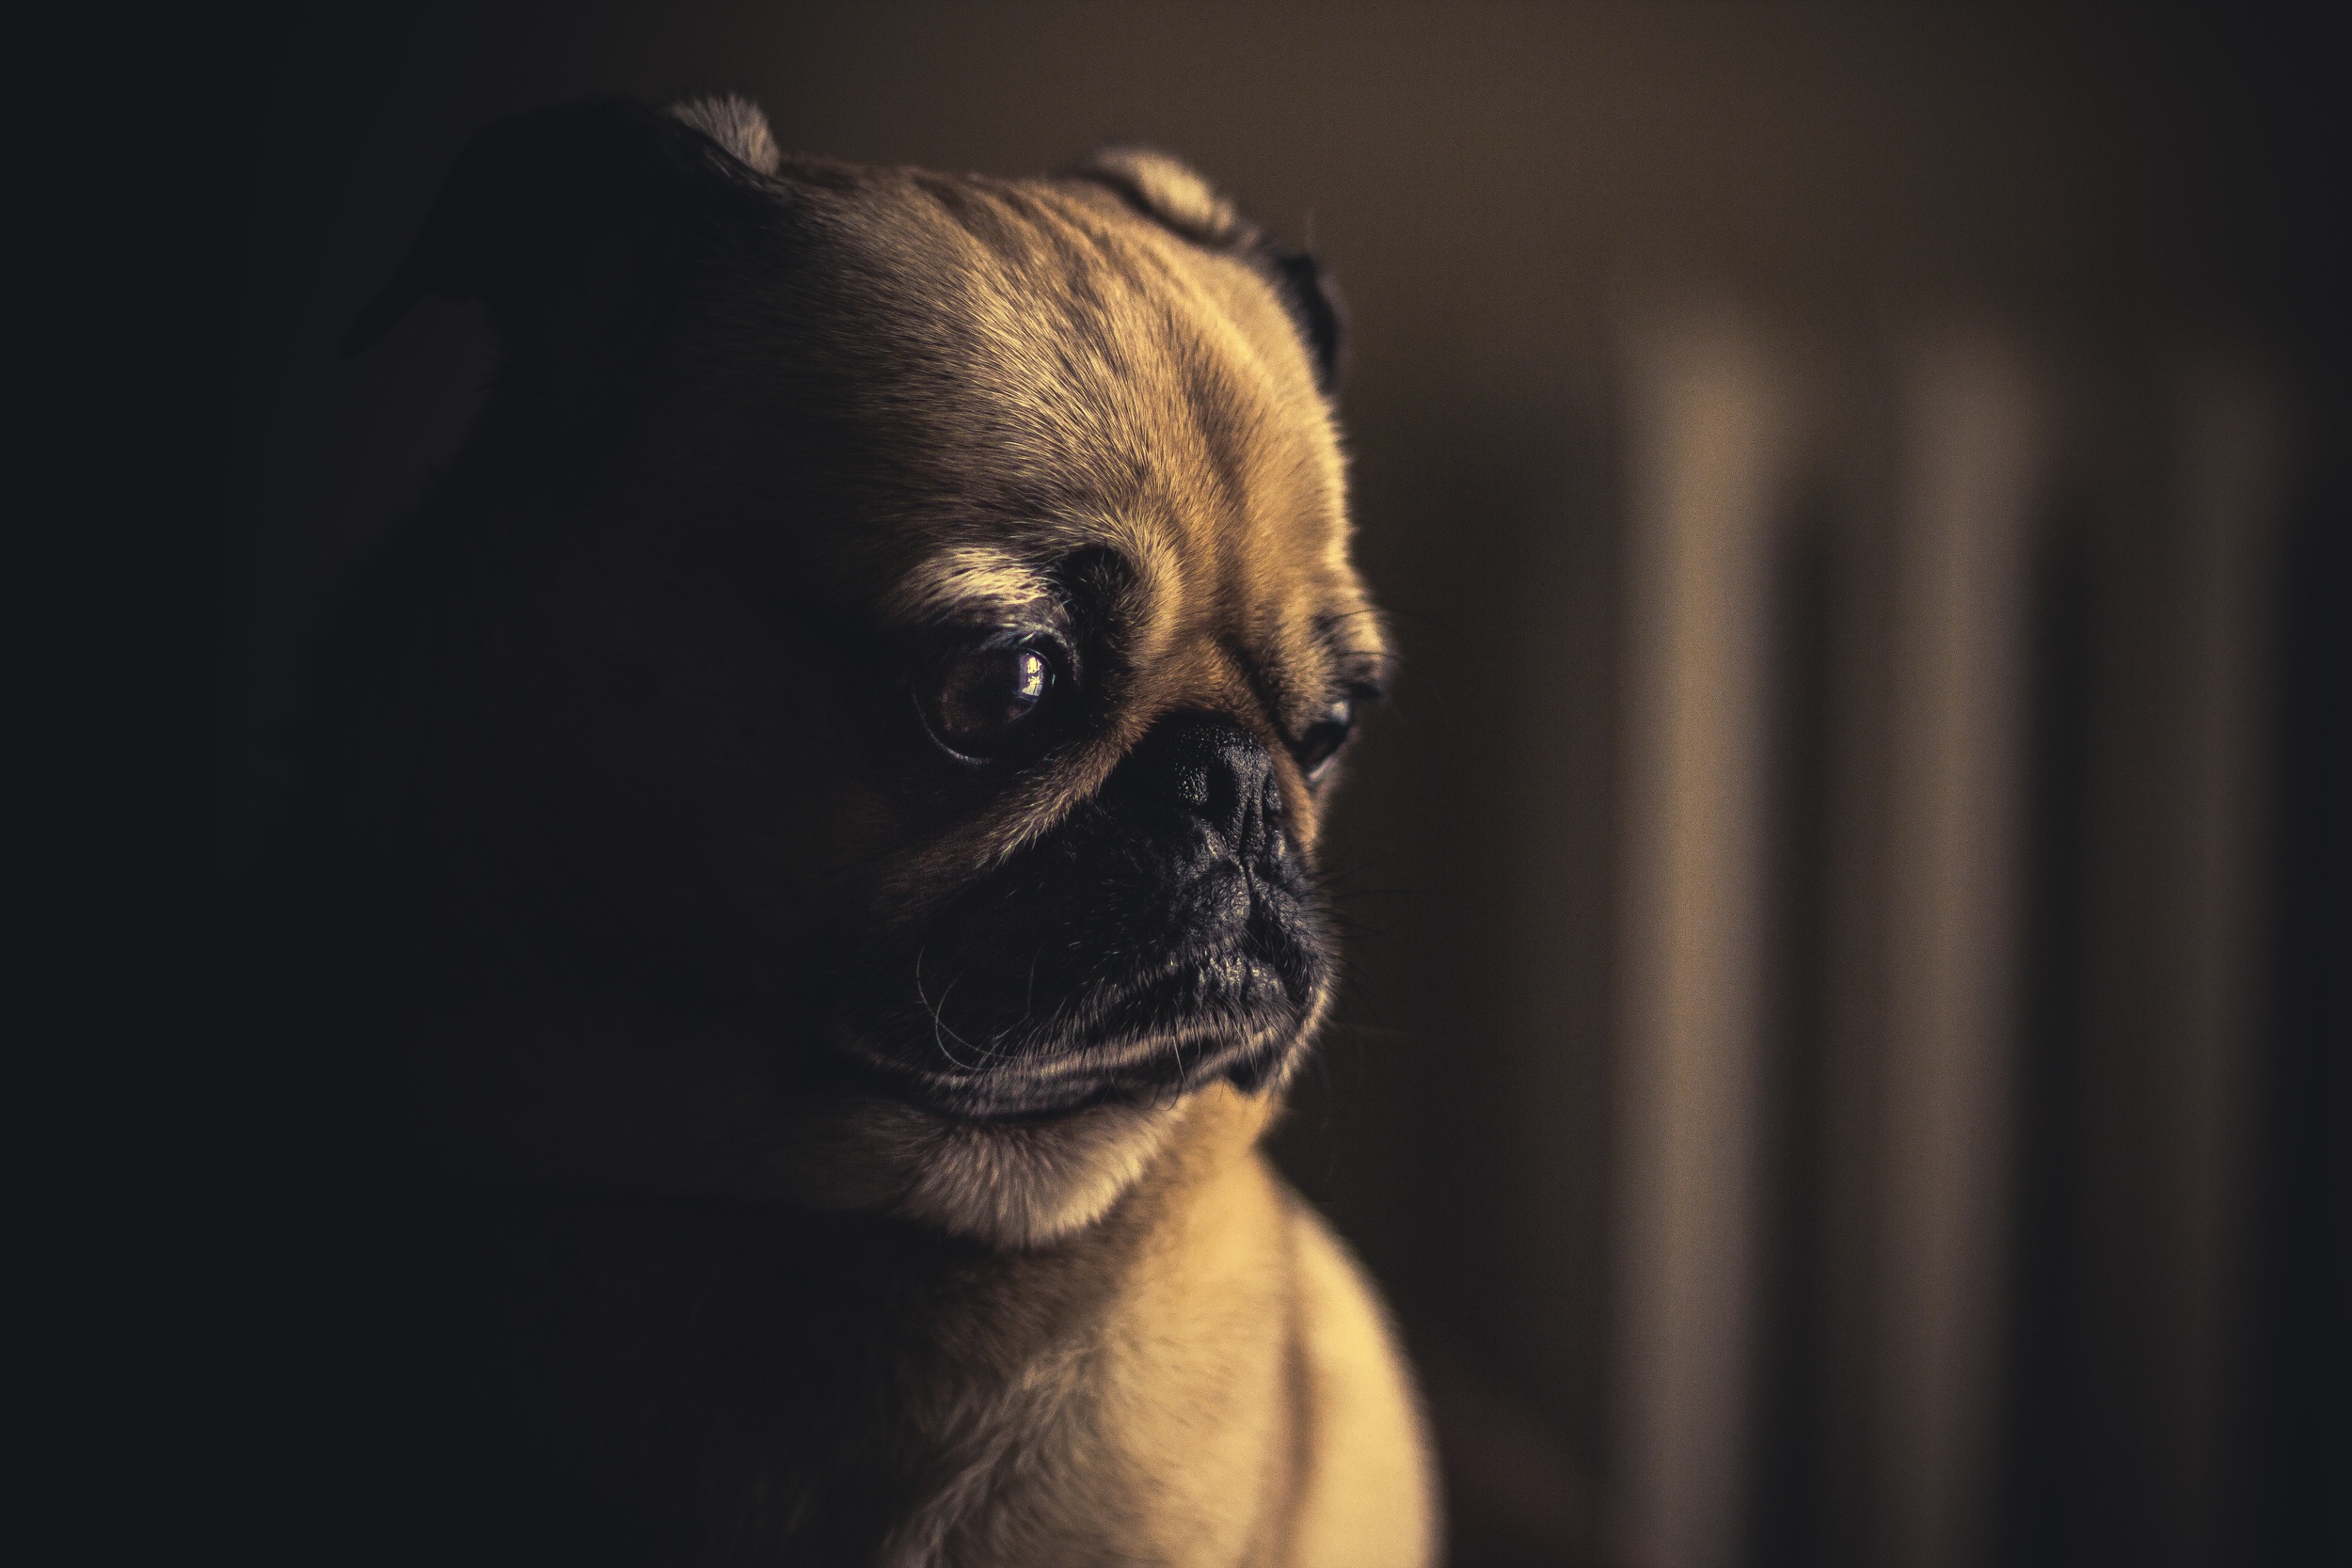 This sad dog has a cluttered caption. (Photo by Matthew Weibe, reproduced under a Creative Commons Zero license:&nbsp;https://unsplash.com/photos/hnYMacpvKZY) 